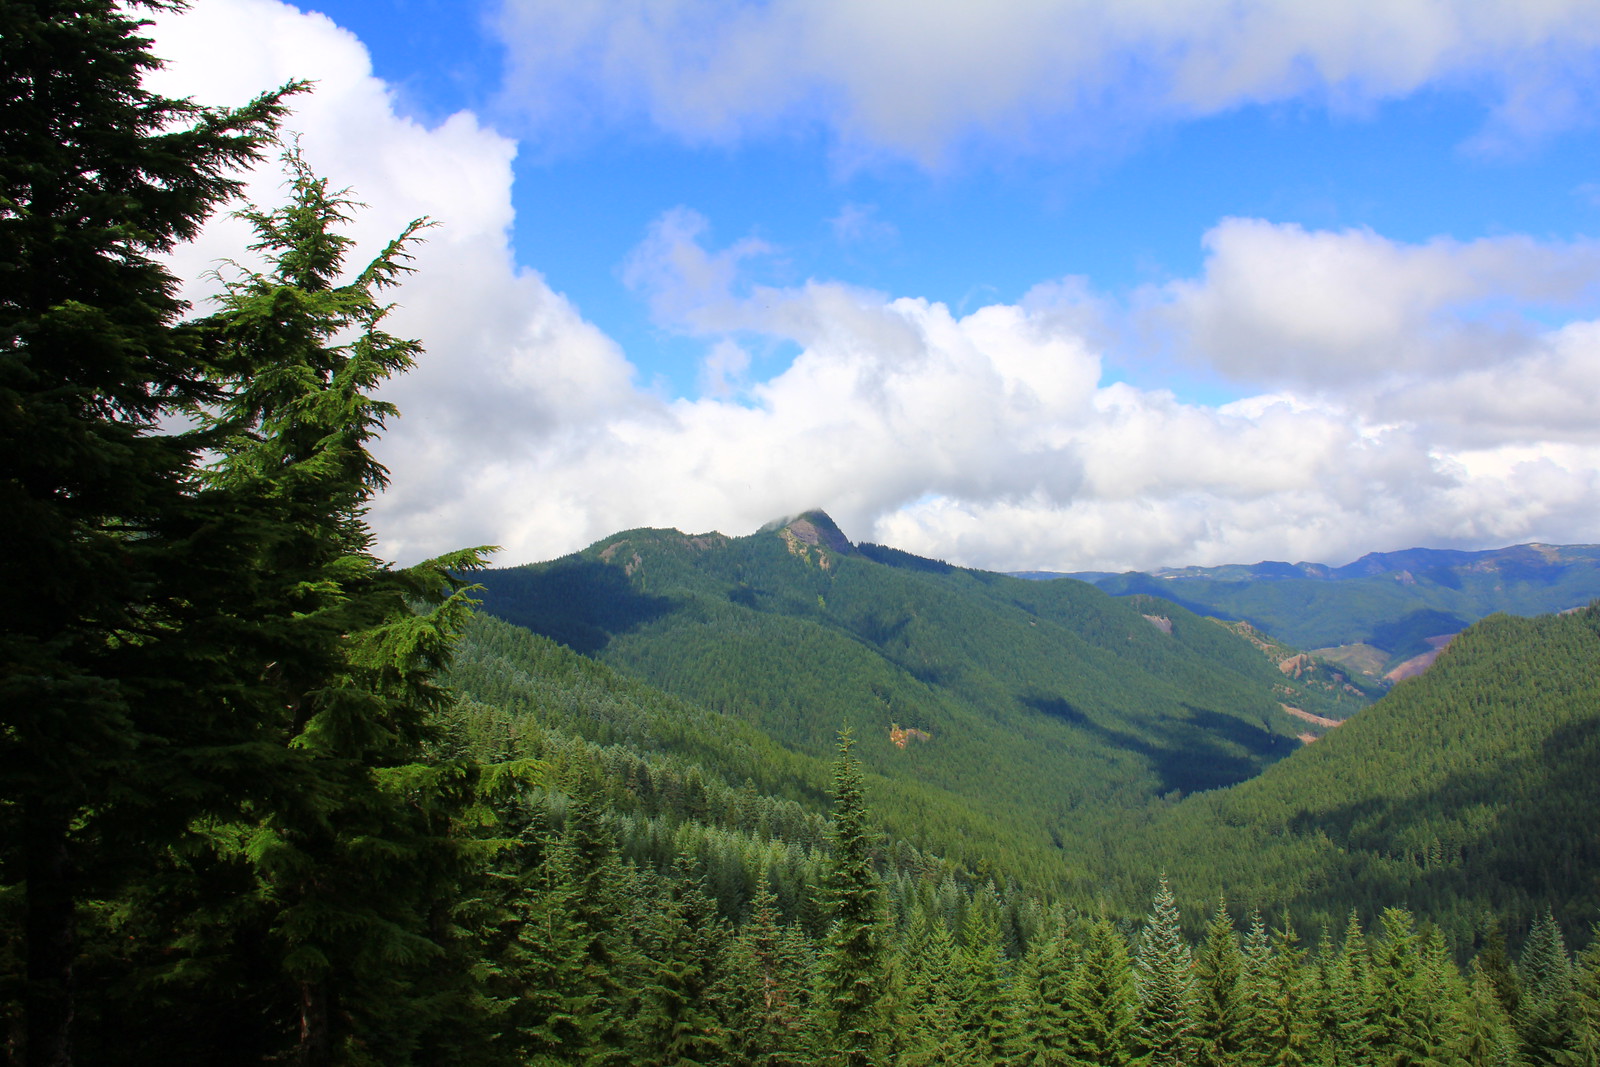 View from Pechuck Lookout.